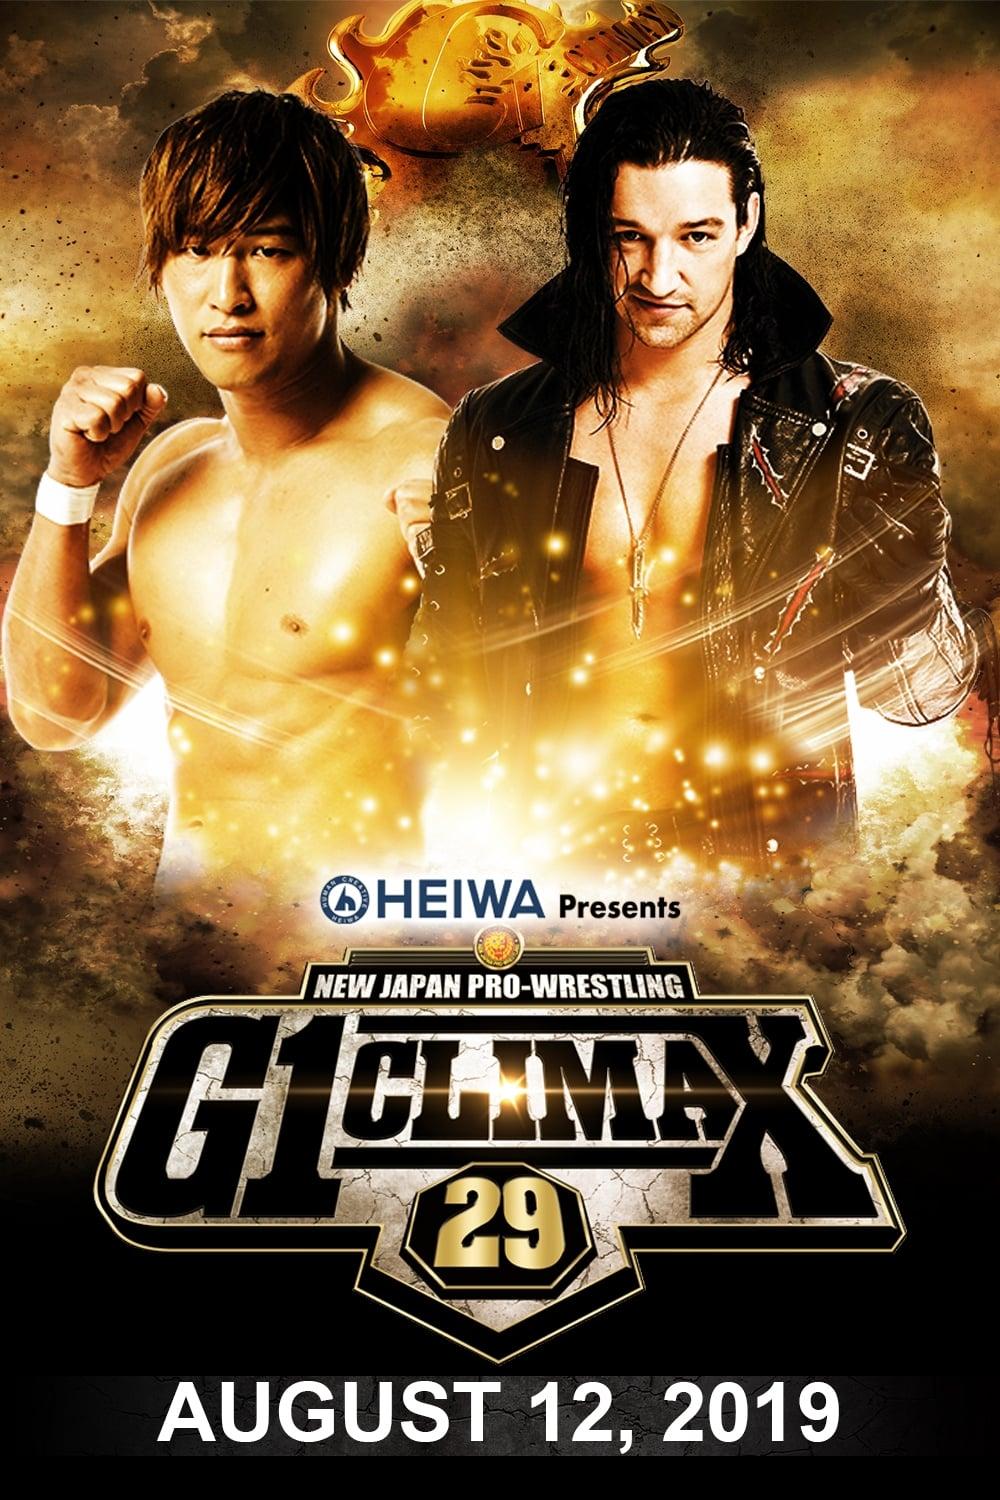 NJPW G1 Climax 29: Day 19 poster